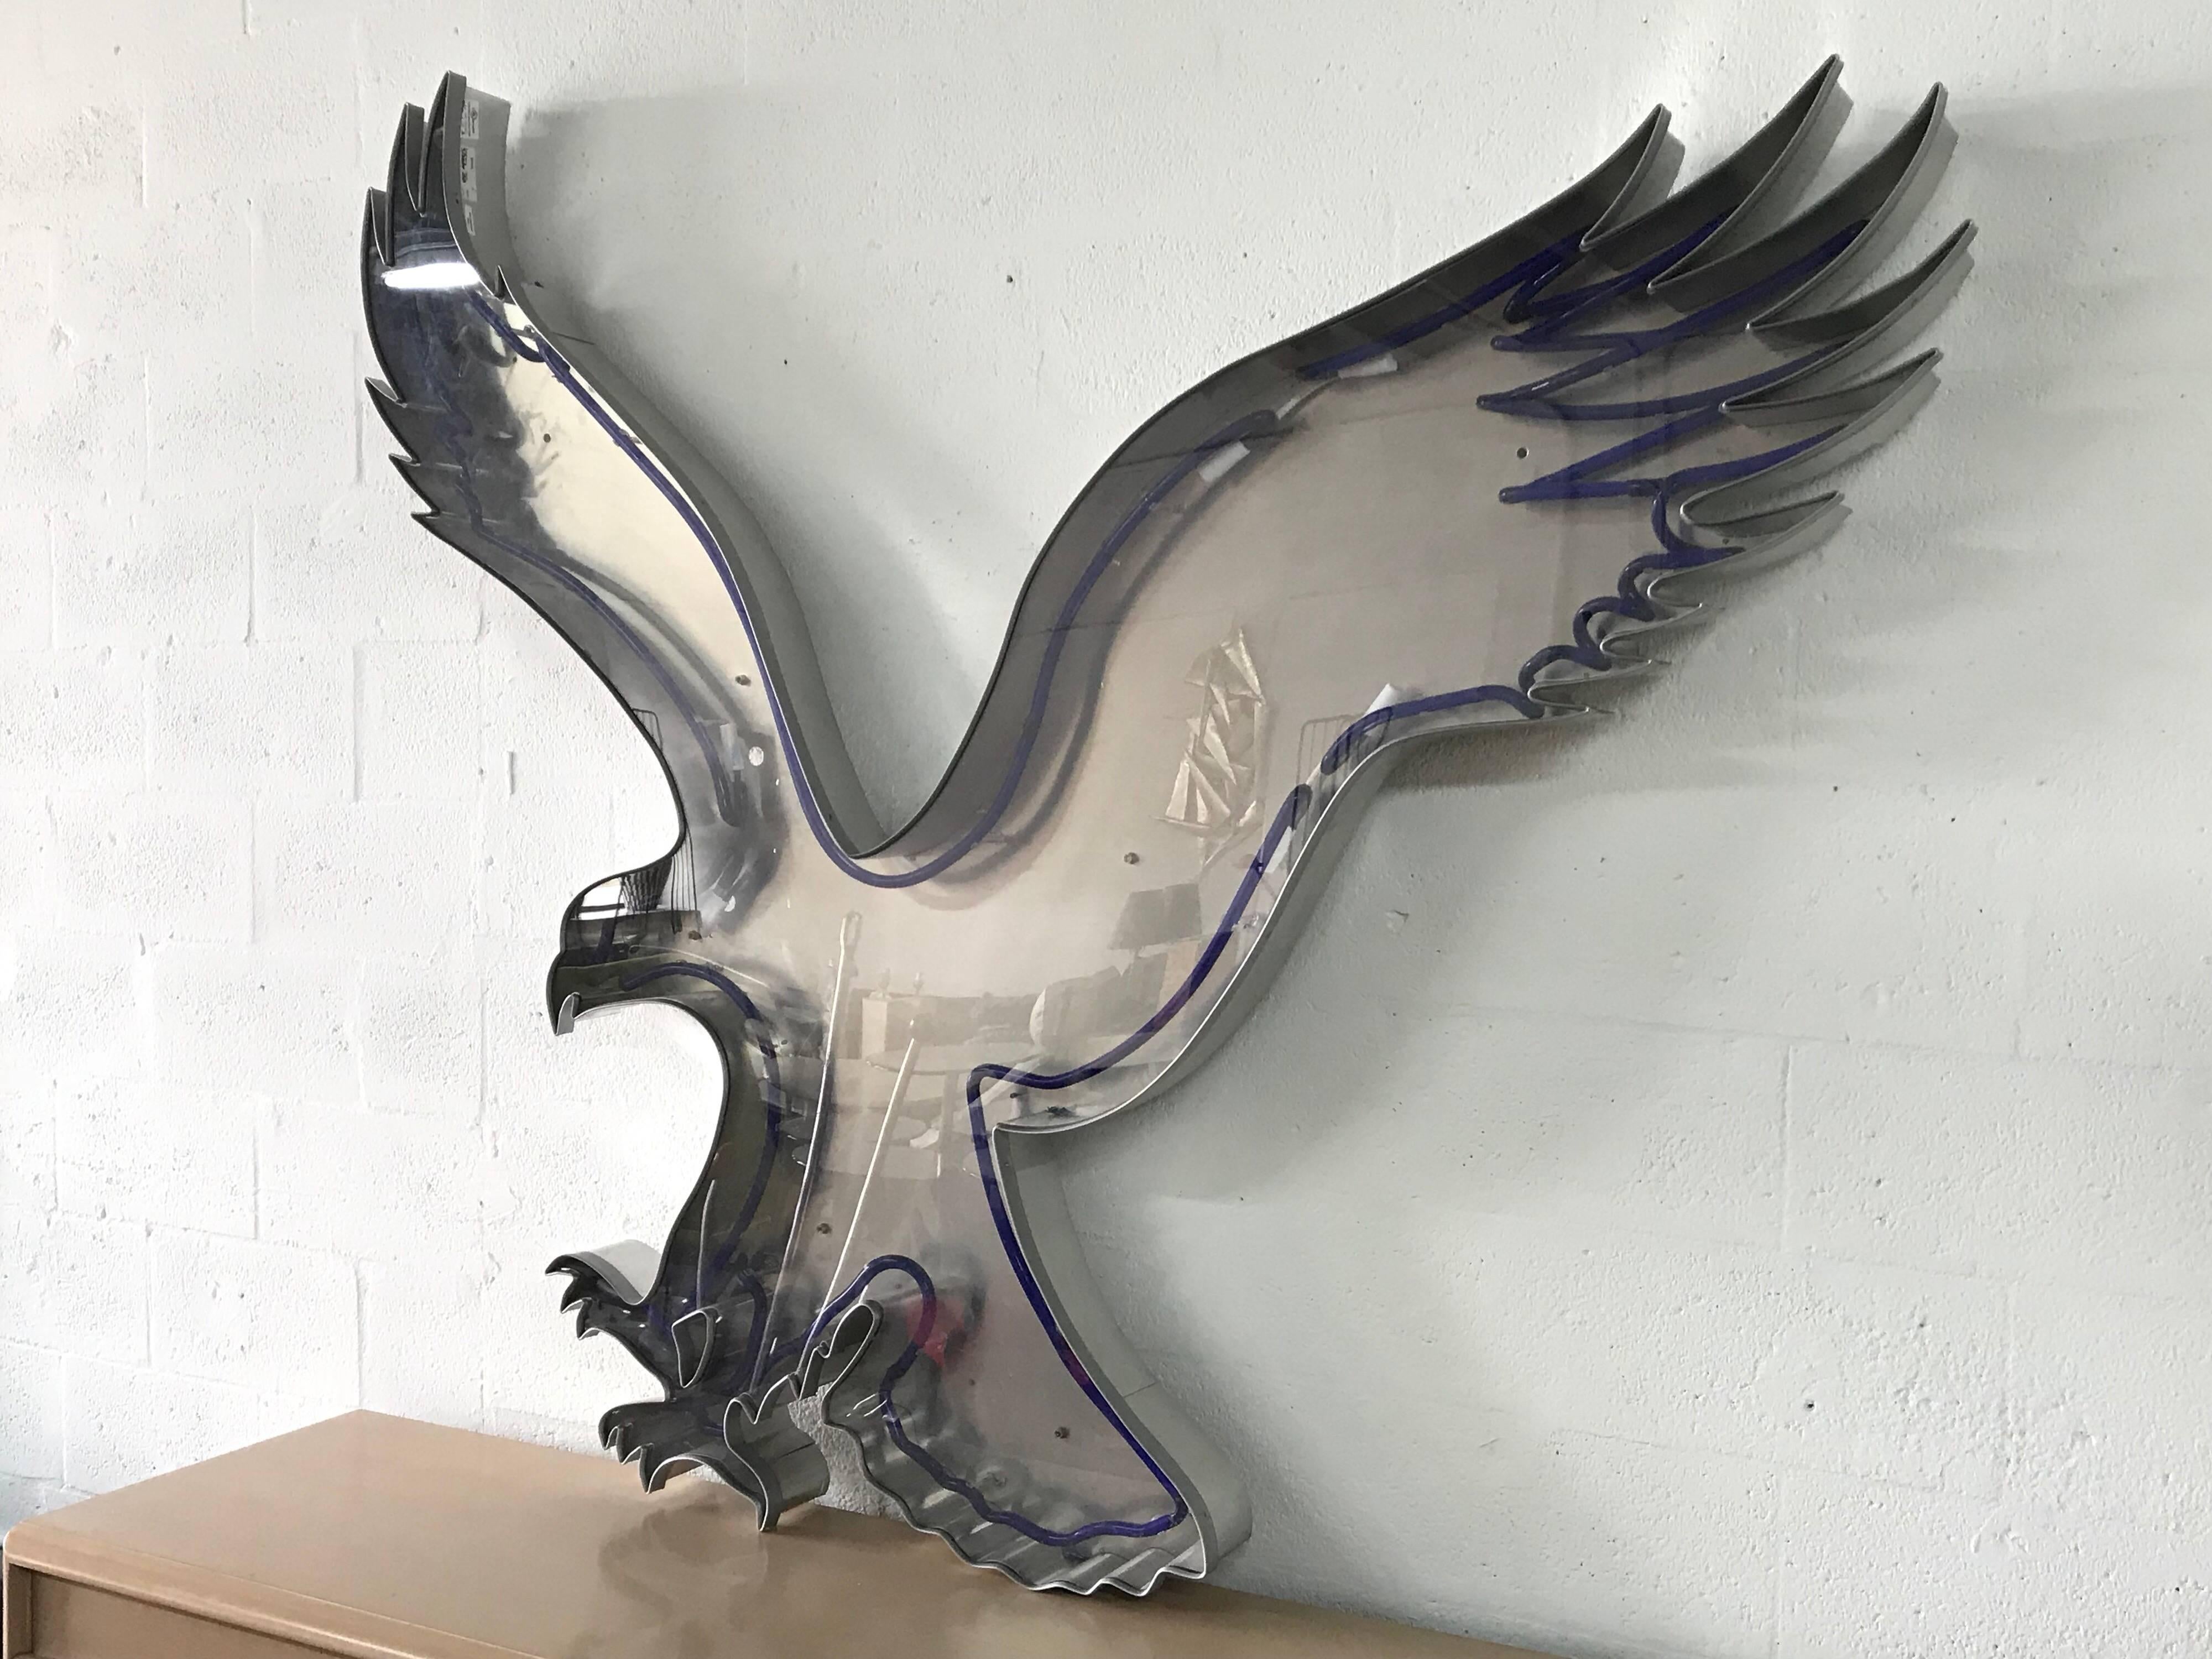 Folk Art neon sign of an eagle rendered in blue neon incased in an aluminum frame with a Lucite cover.